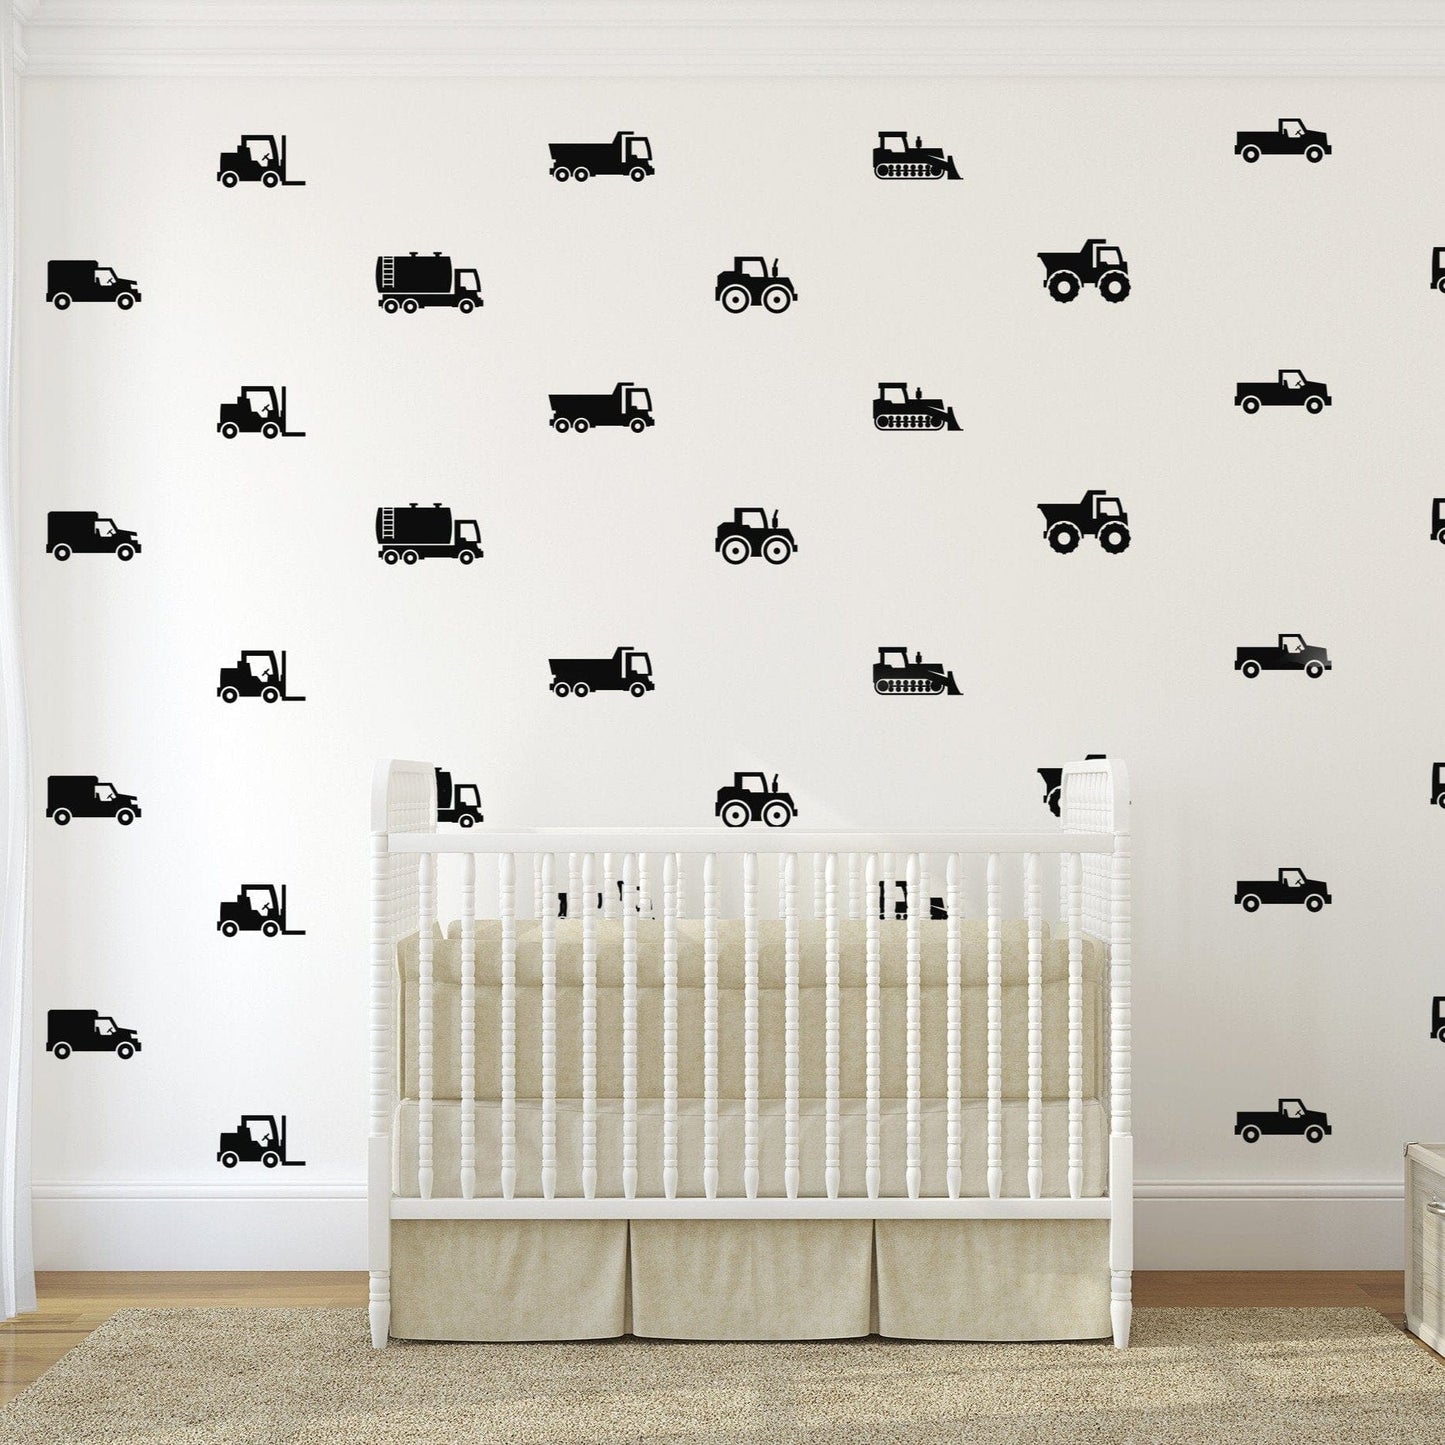 diggers-and-trucks-wall-decal_wall-decals-for-kids